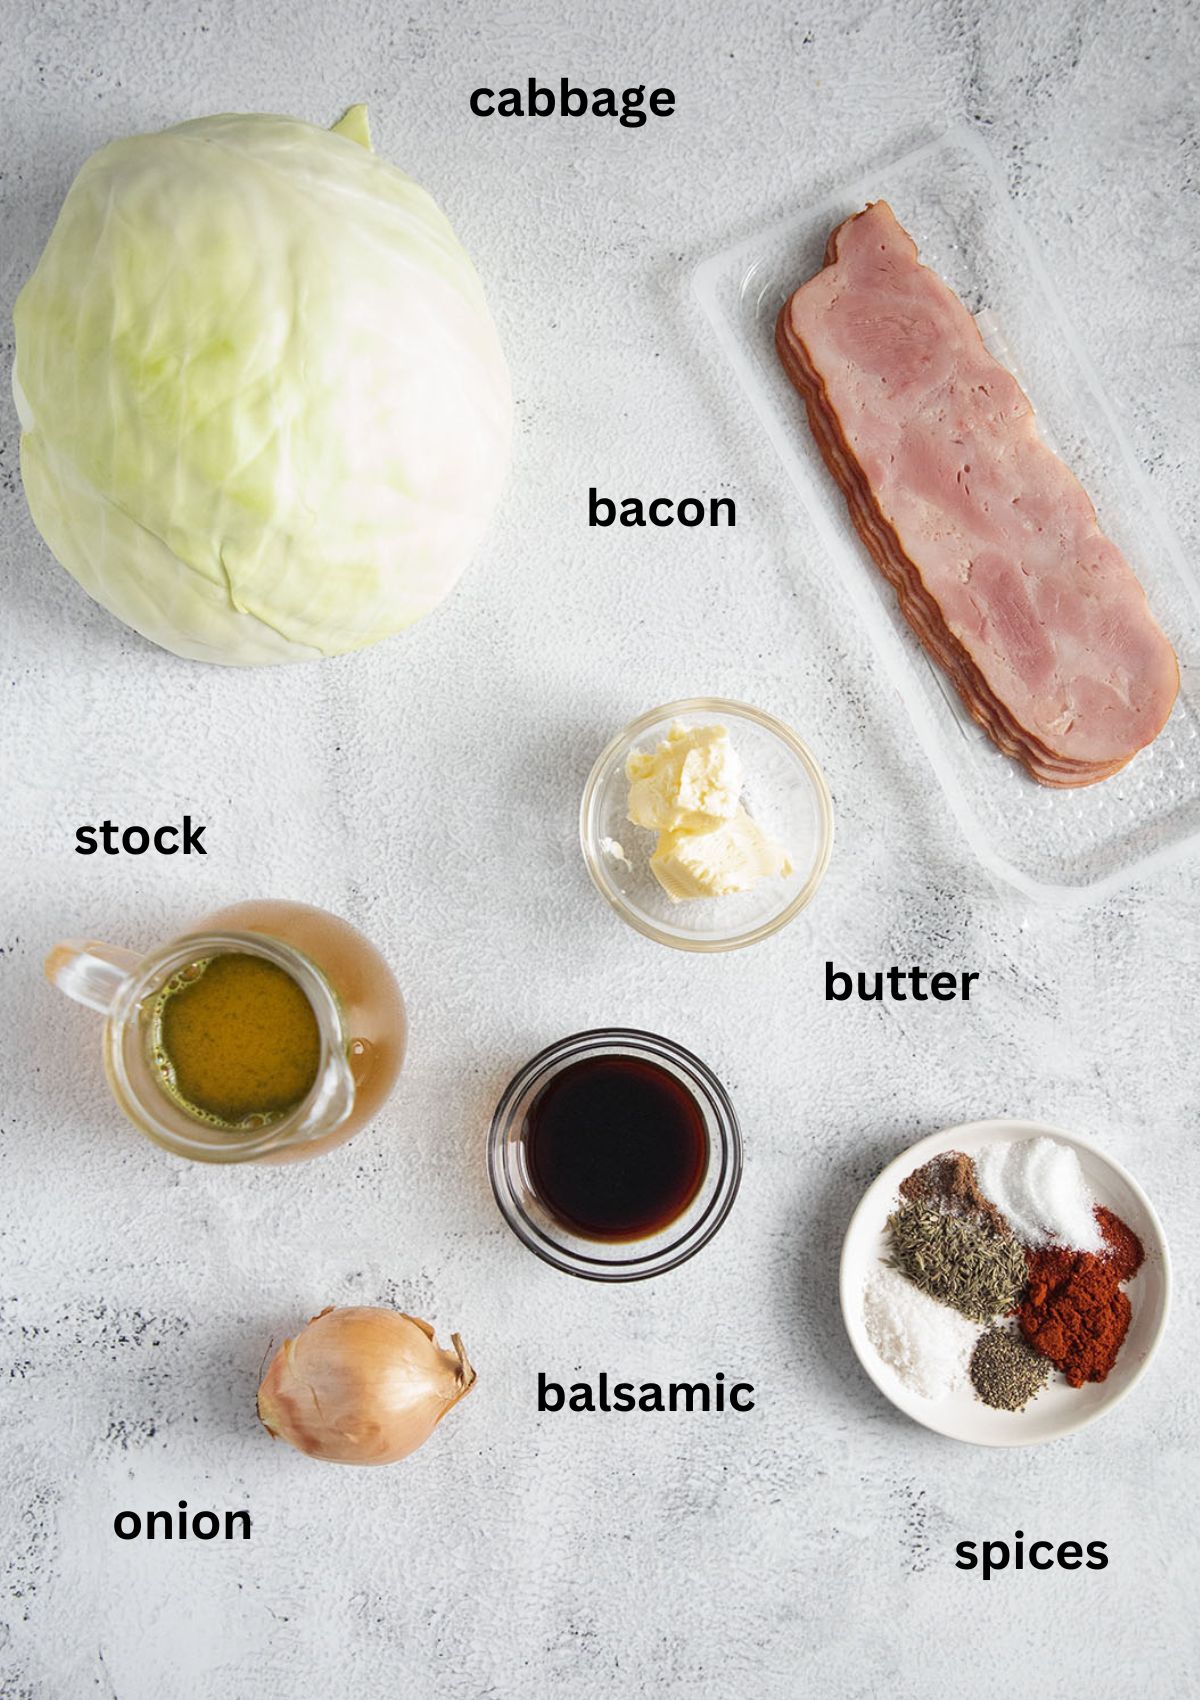 labeled ingredients for cooking white cabbage with bacon, onion, butter and spices.